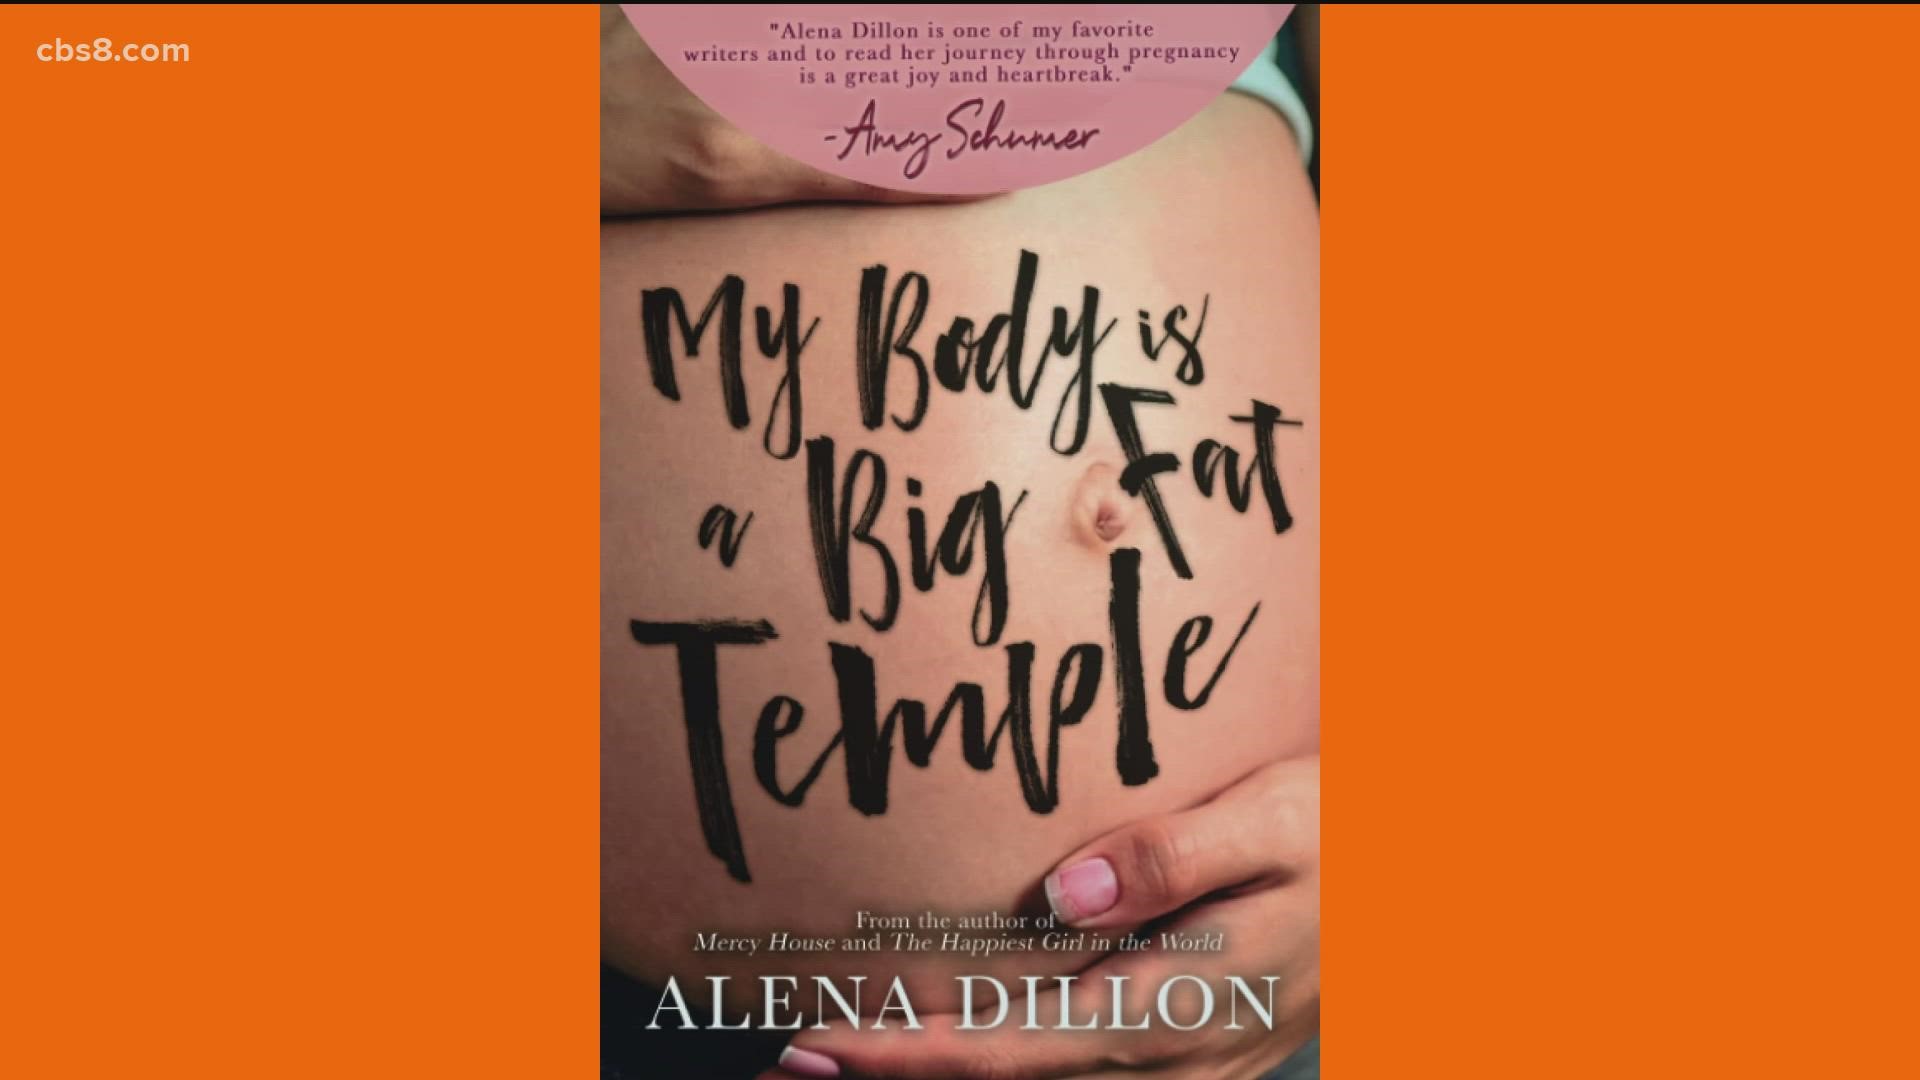 Author Alena Dillion joined Morning Extra to talk about her book, My Body is a Big Fat Temple: An Ordinary Story of Pregnancy and Early Motherhood.